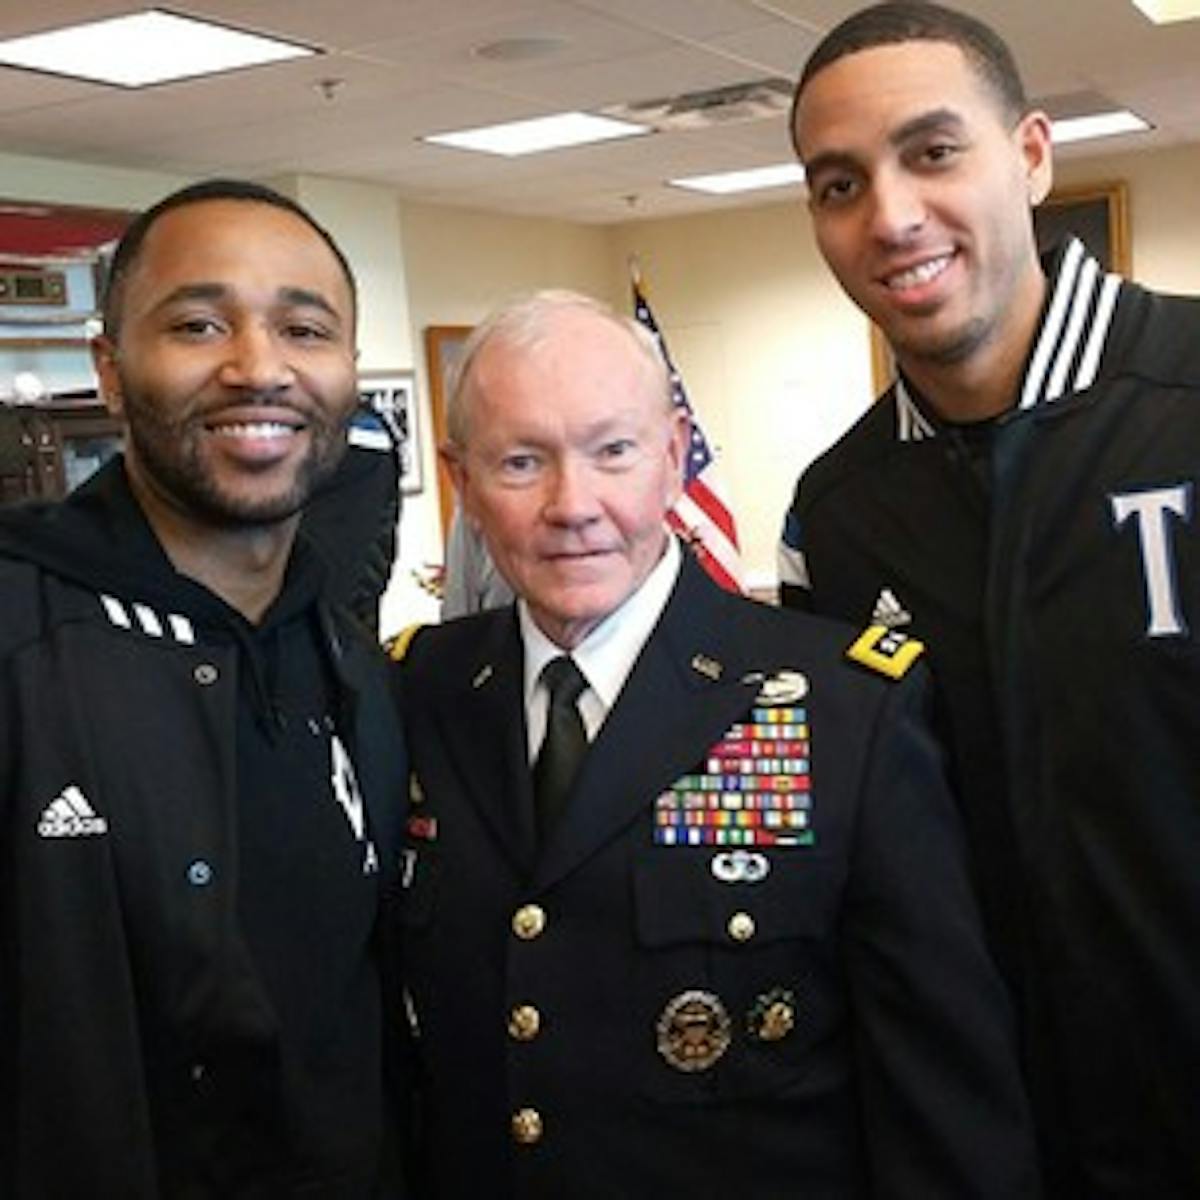 Mo Williams, left, posted this Instagram image of him with Joint Chiefs of Staff Chairman Martin Dempsey, center, and Kevin Martin.